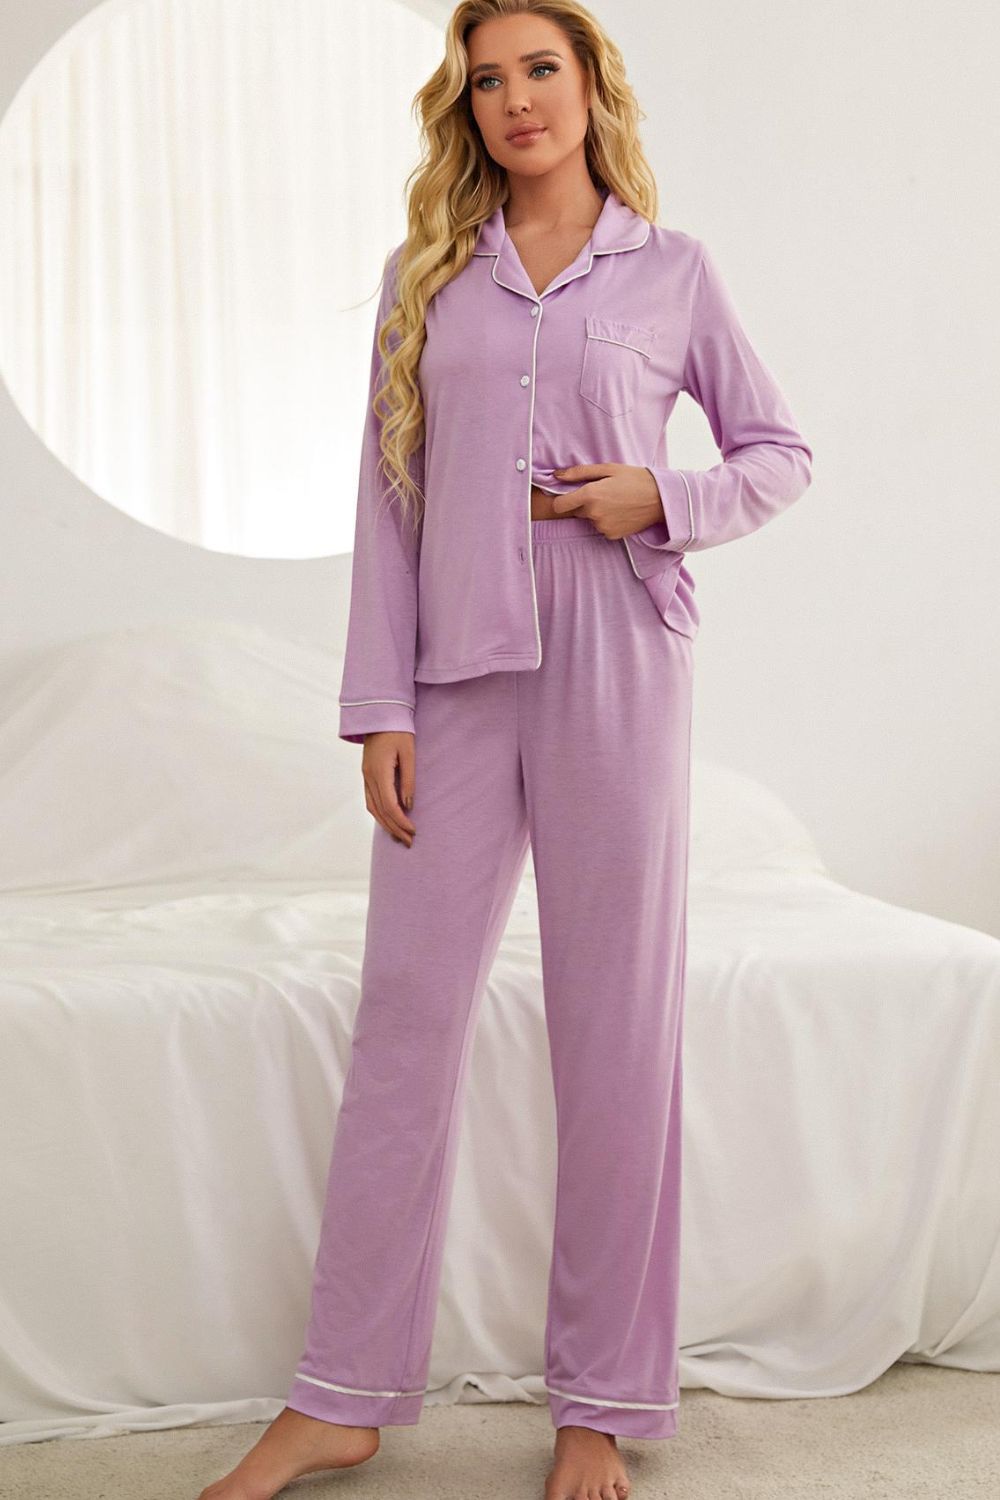 Women’s Contrast Piping Button Down Top and Pants Loungewear Set